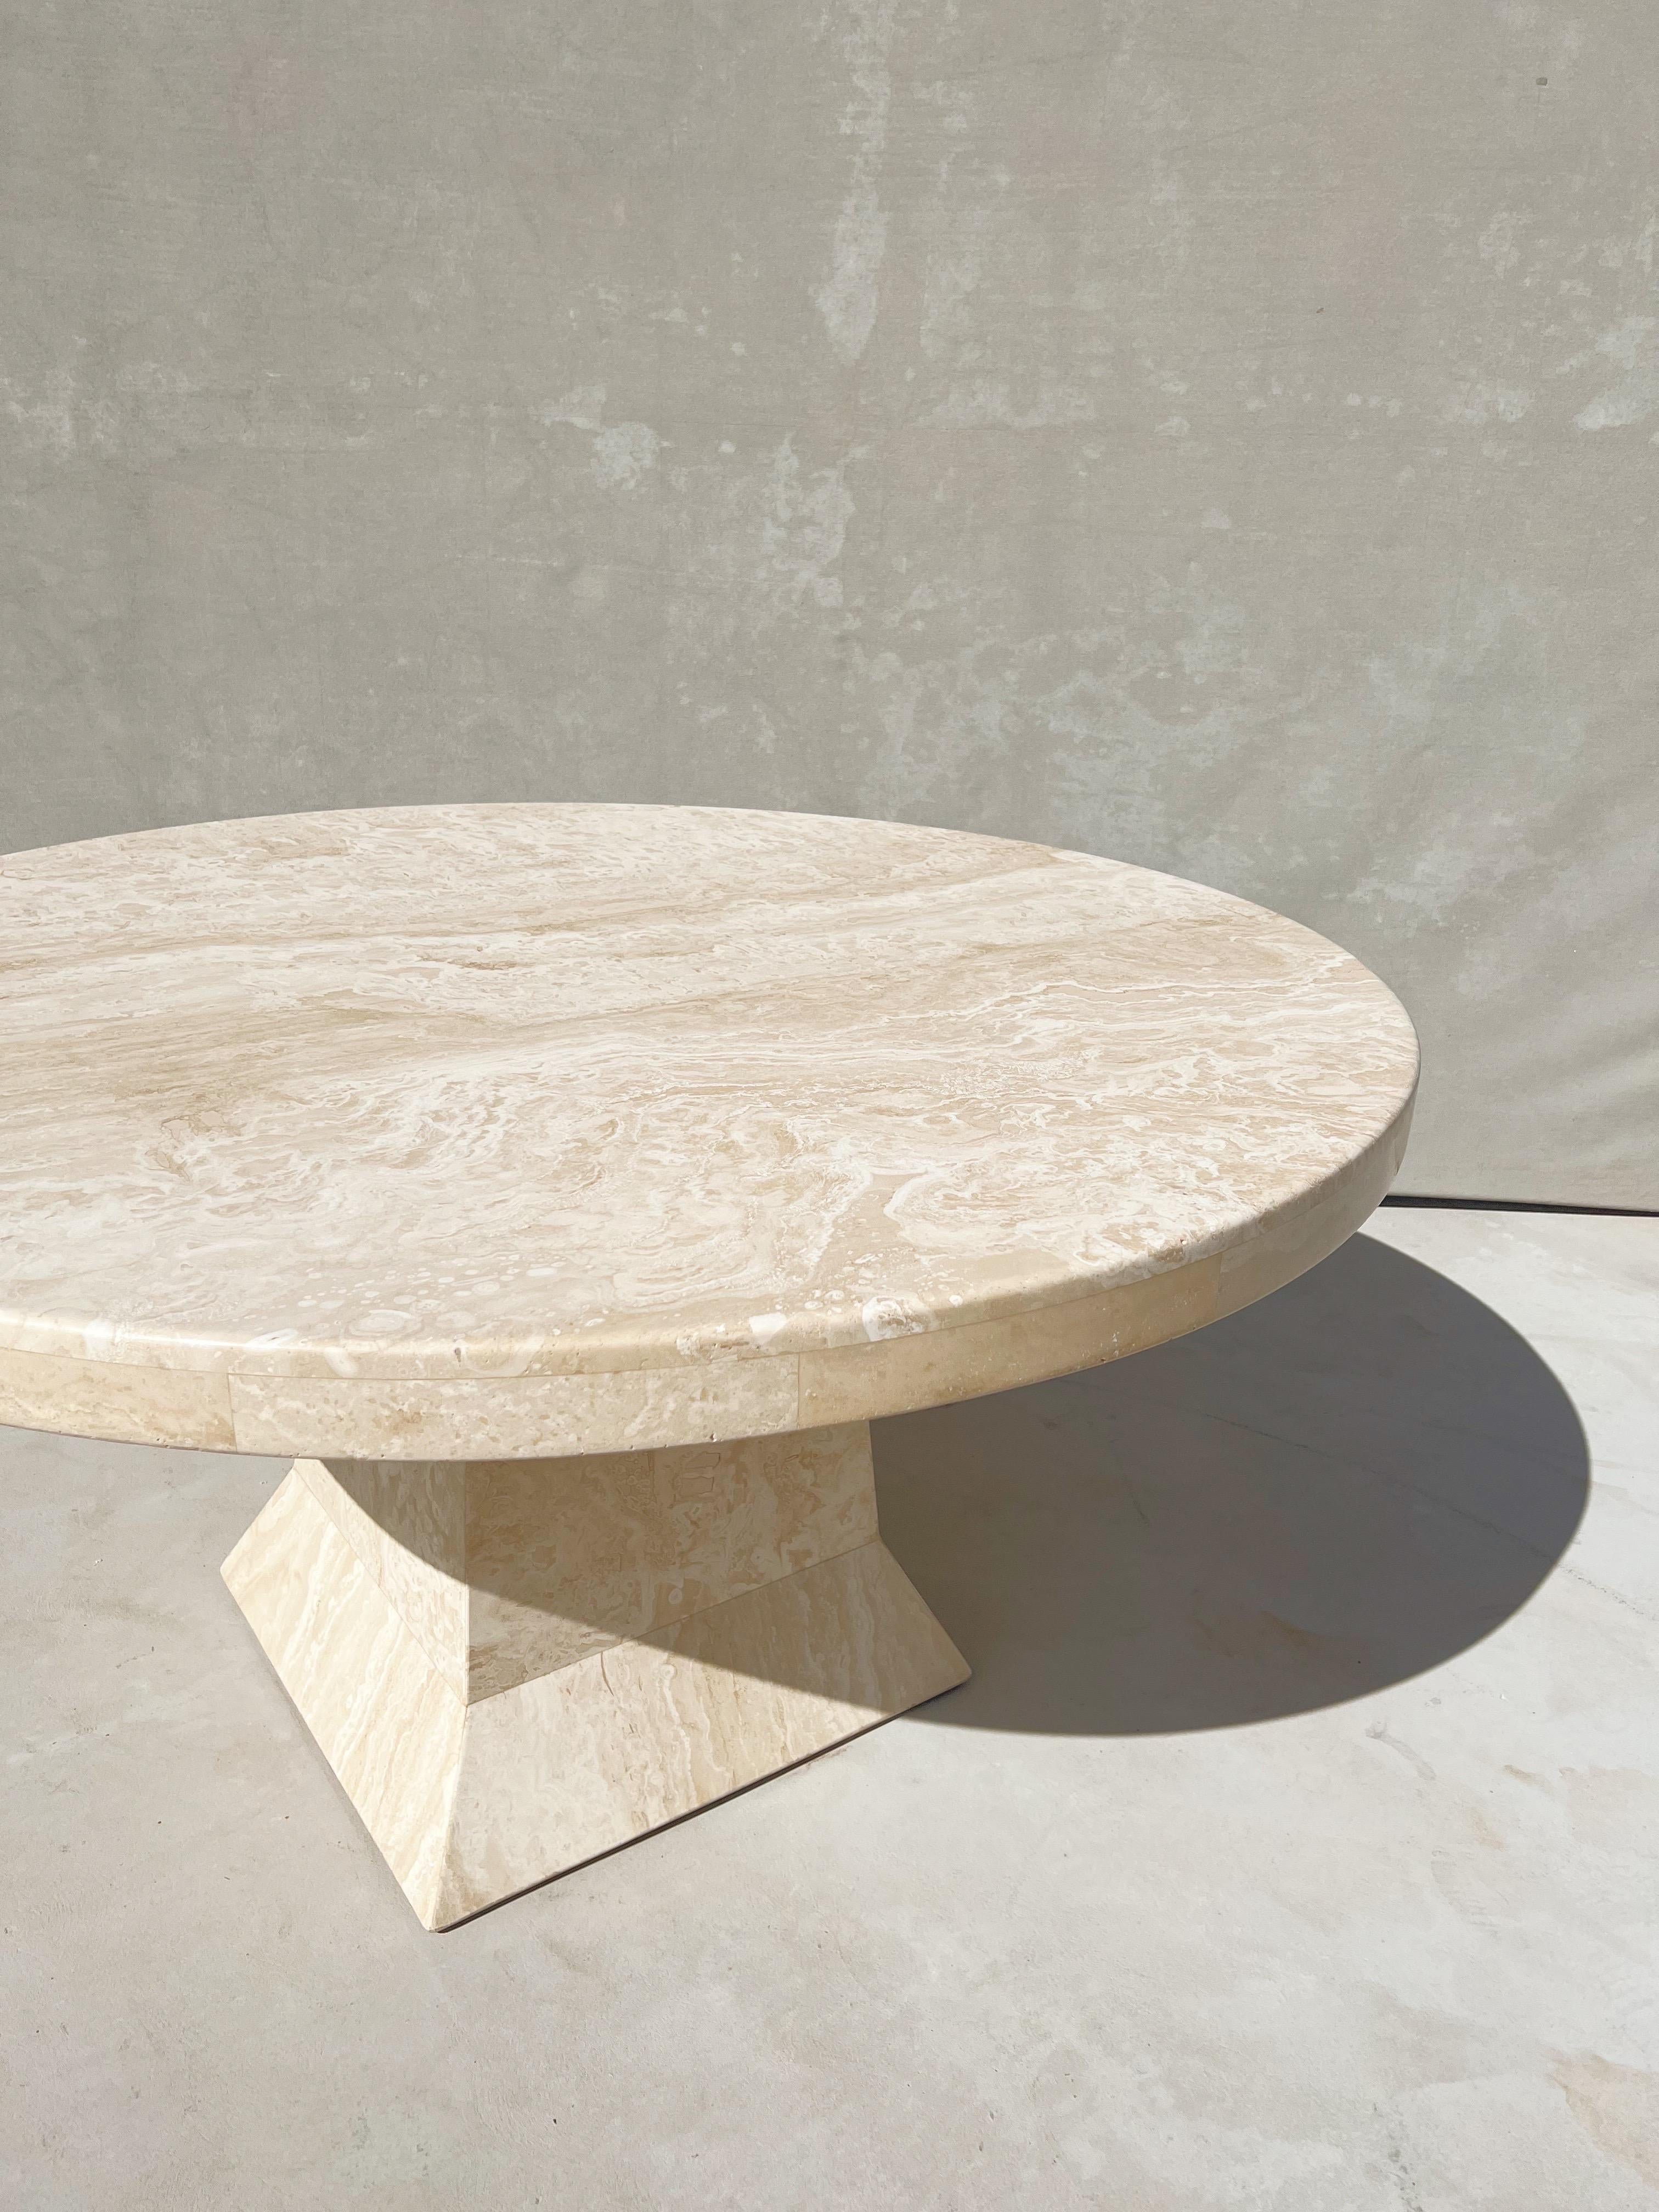 Vintage Modern Italian Travertine Round Dining Table with a Sculptural Base 14